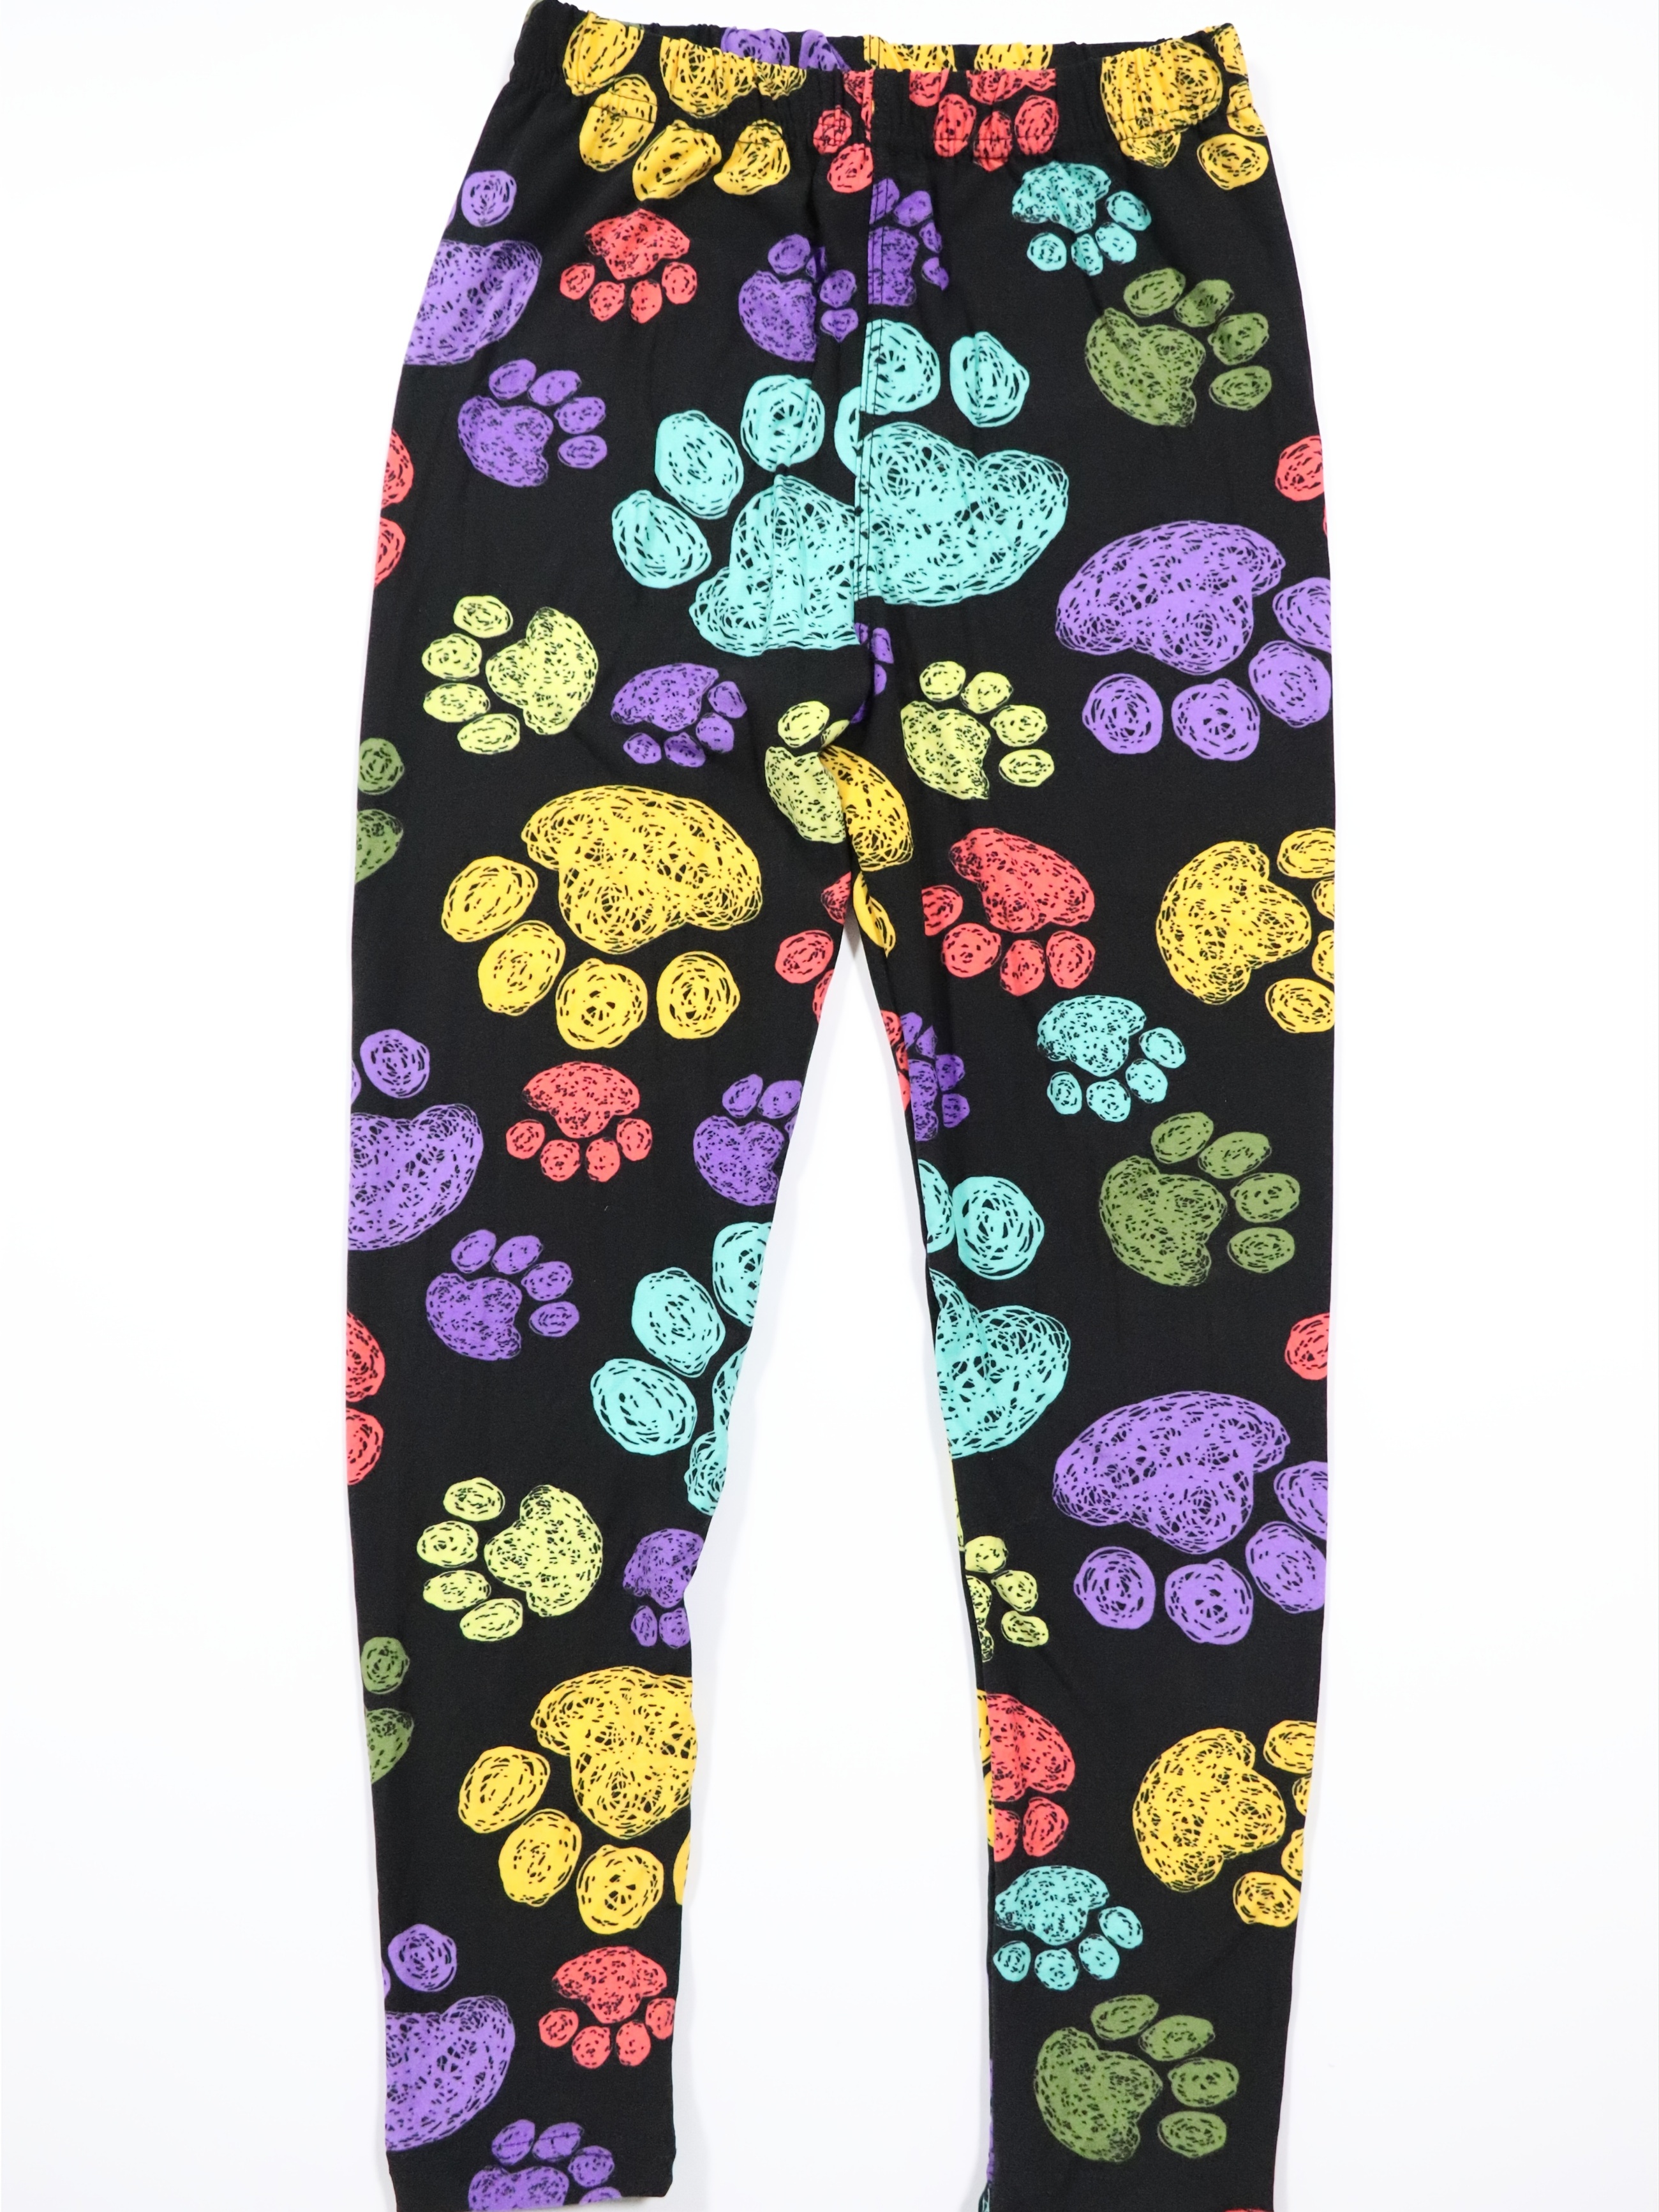 Girls Tight Fit Athletic Legging Pants With Cute Claws Print